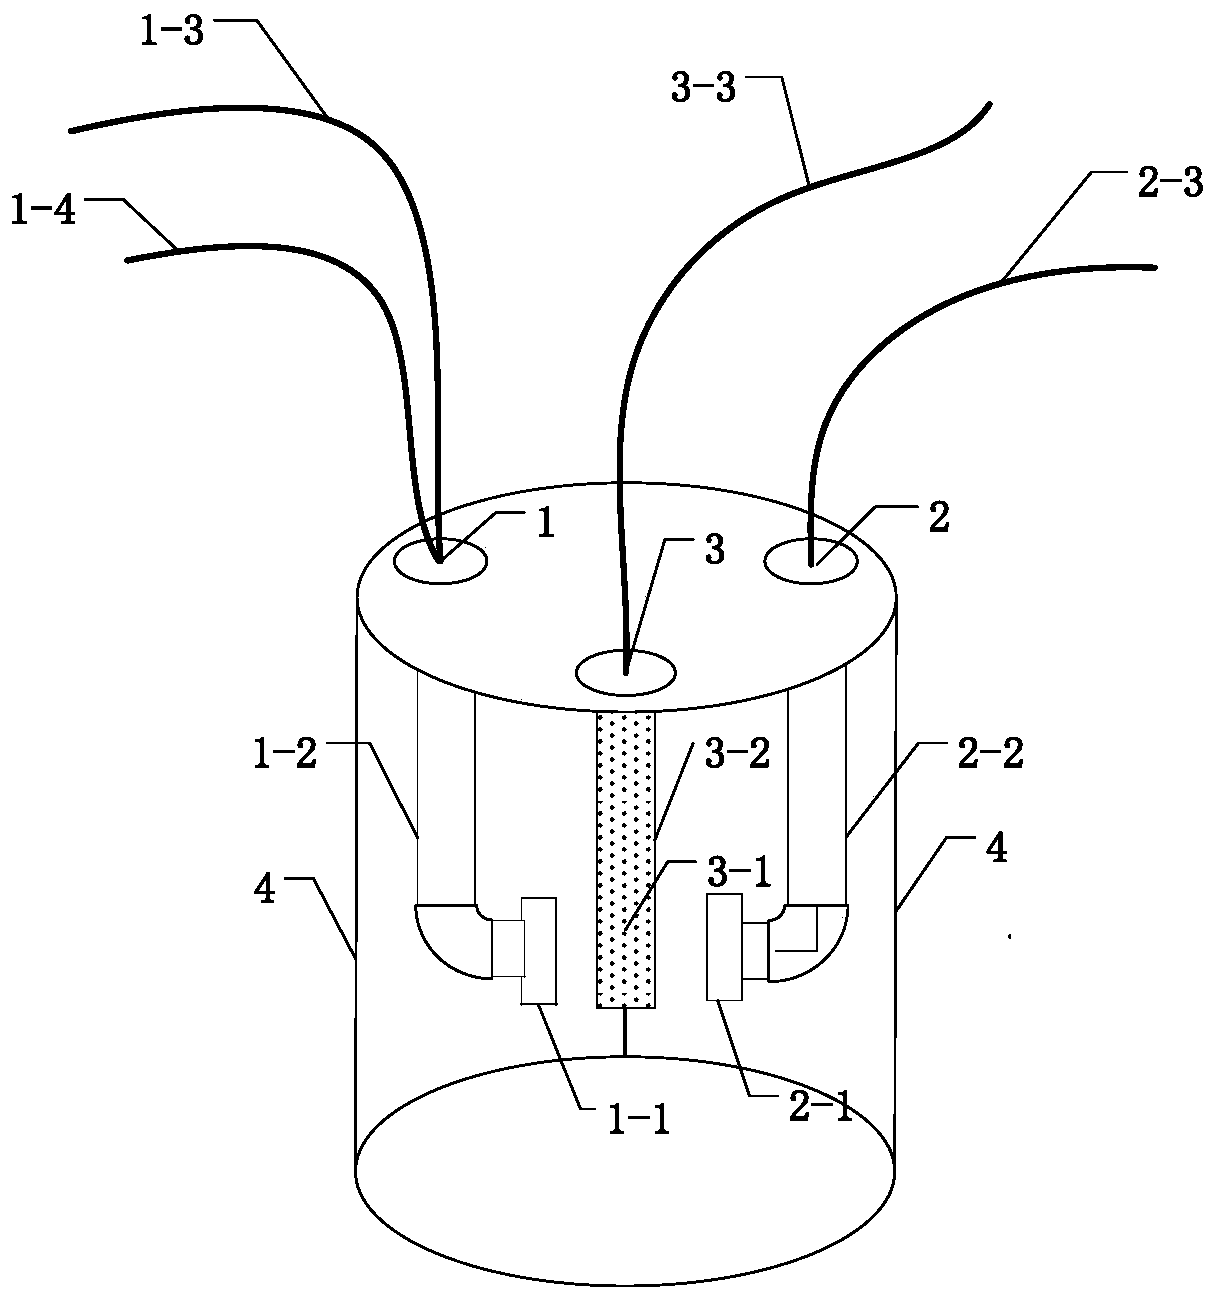 A portable grounding grid corrosion state monitoring system and monitoring method